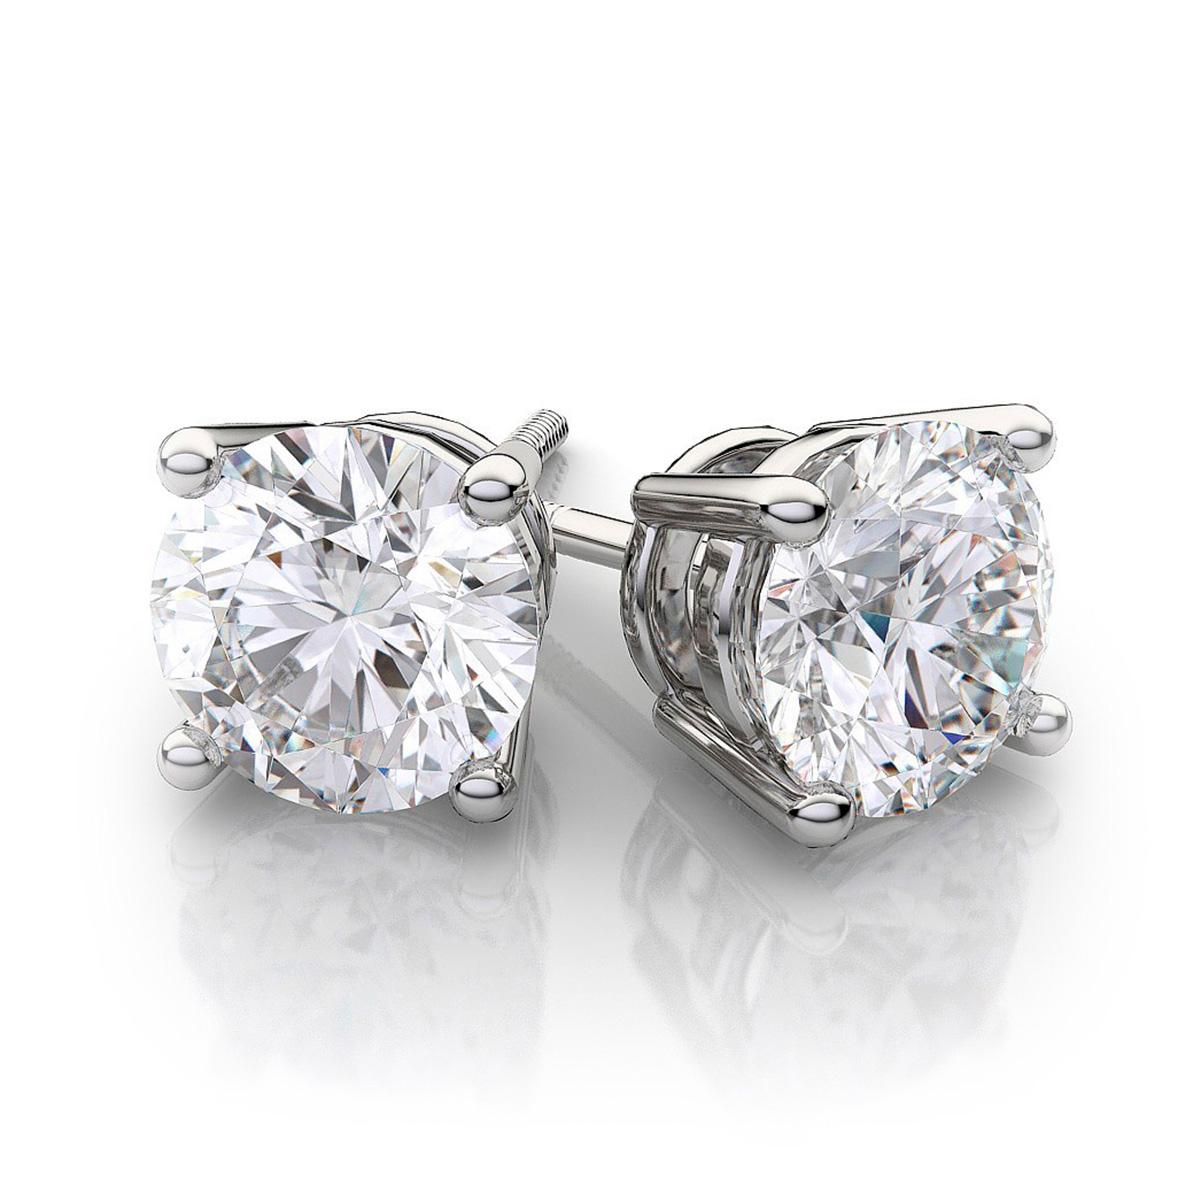 Diamond Solitaire Studs are a signature everyday piece of jewelry. They are a classic and a statement simultaneously. 

Diamonds Shape: Round 
Diamonds Weight: 1.00 ct + 1.00 ct 
Diamond Color: G
Diamond Clarity: VVS2
Excellent Cut, Polish &